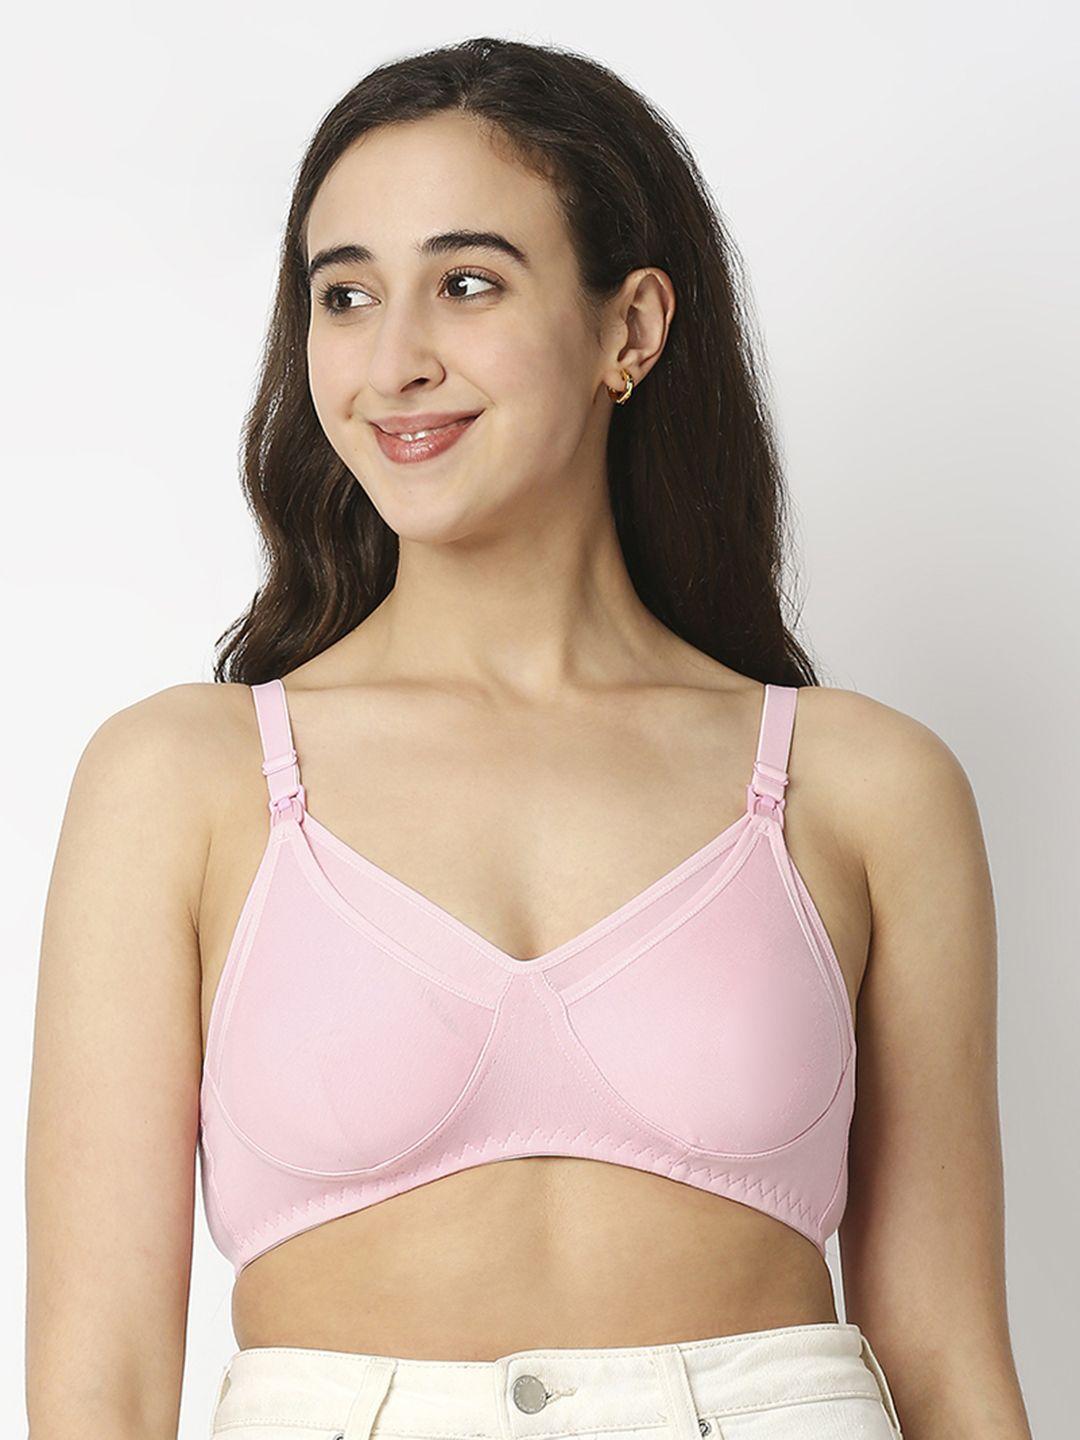 meemee cotton maternity nursing bra with seamless full coverage lightly padded non-wired